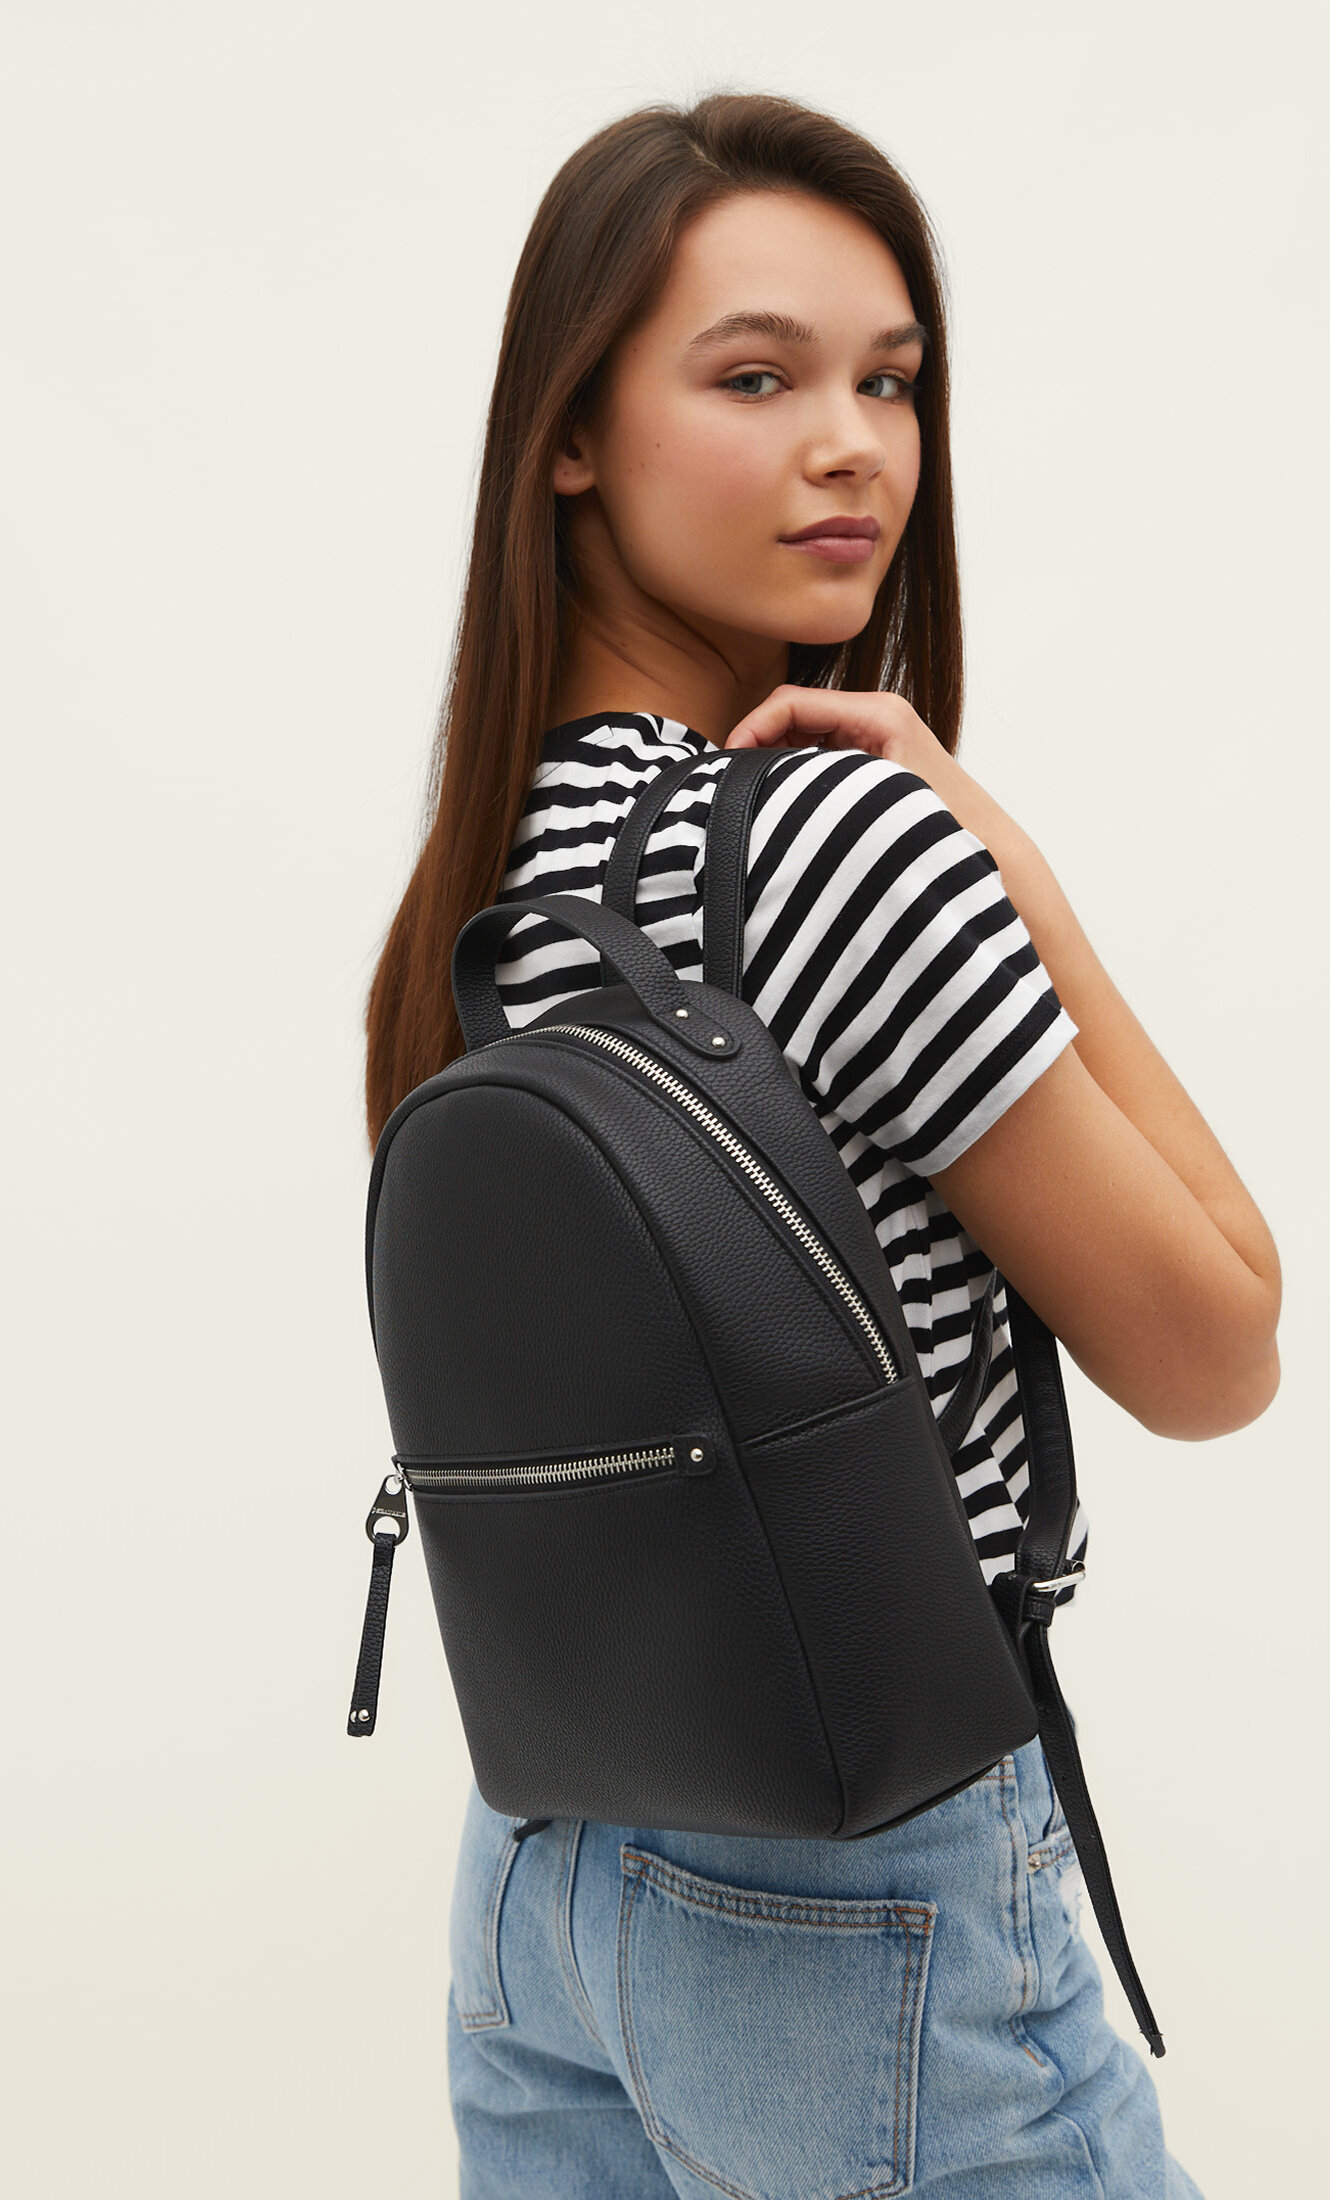 Stradivarius Backpack with - 342468616-001